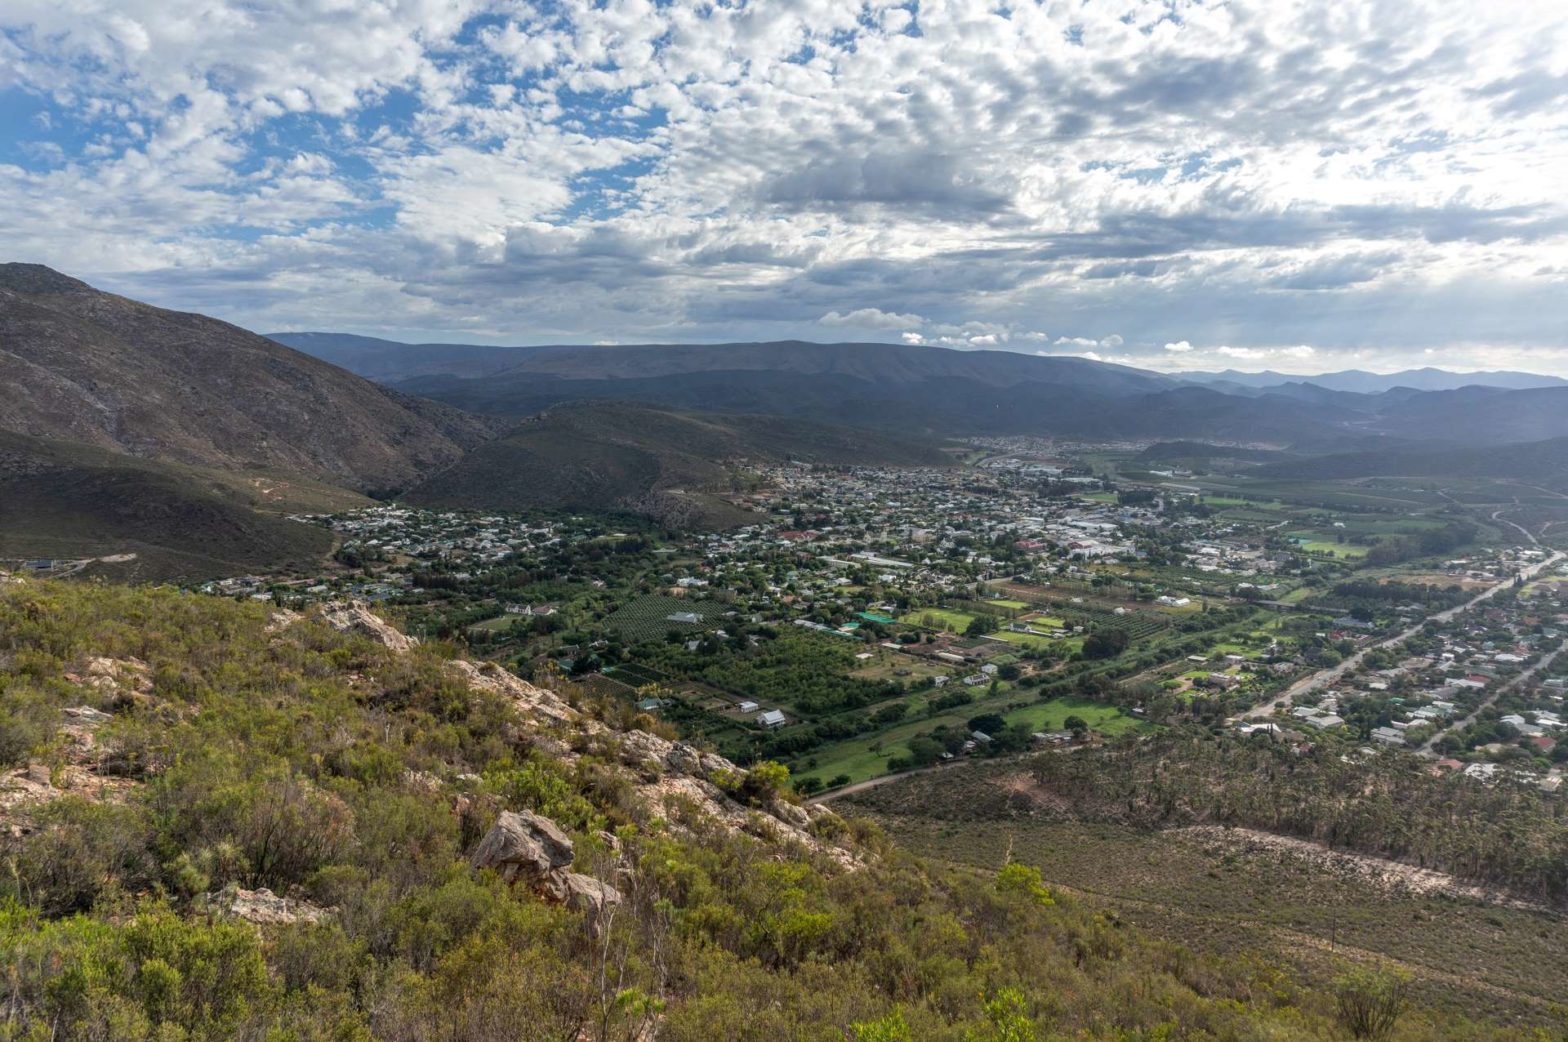 Montagu seen from a nearby hill